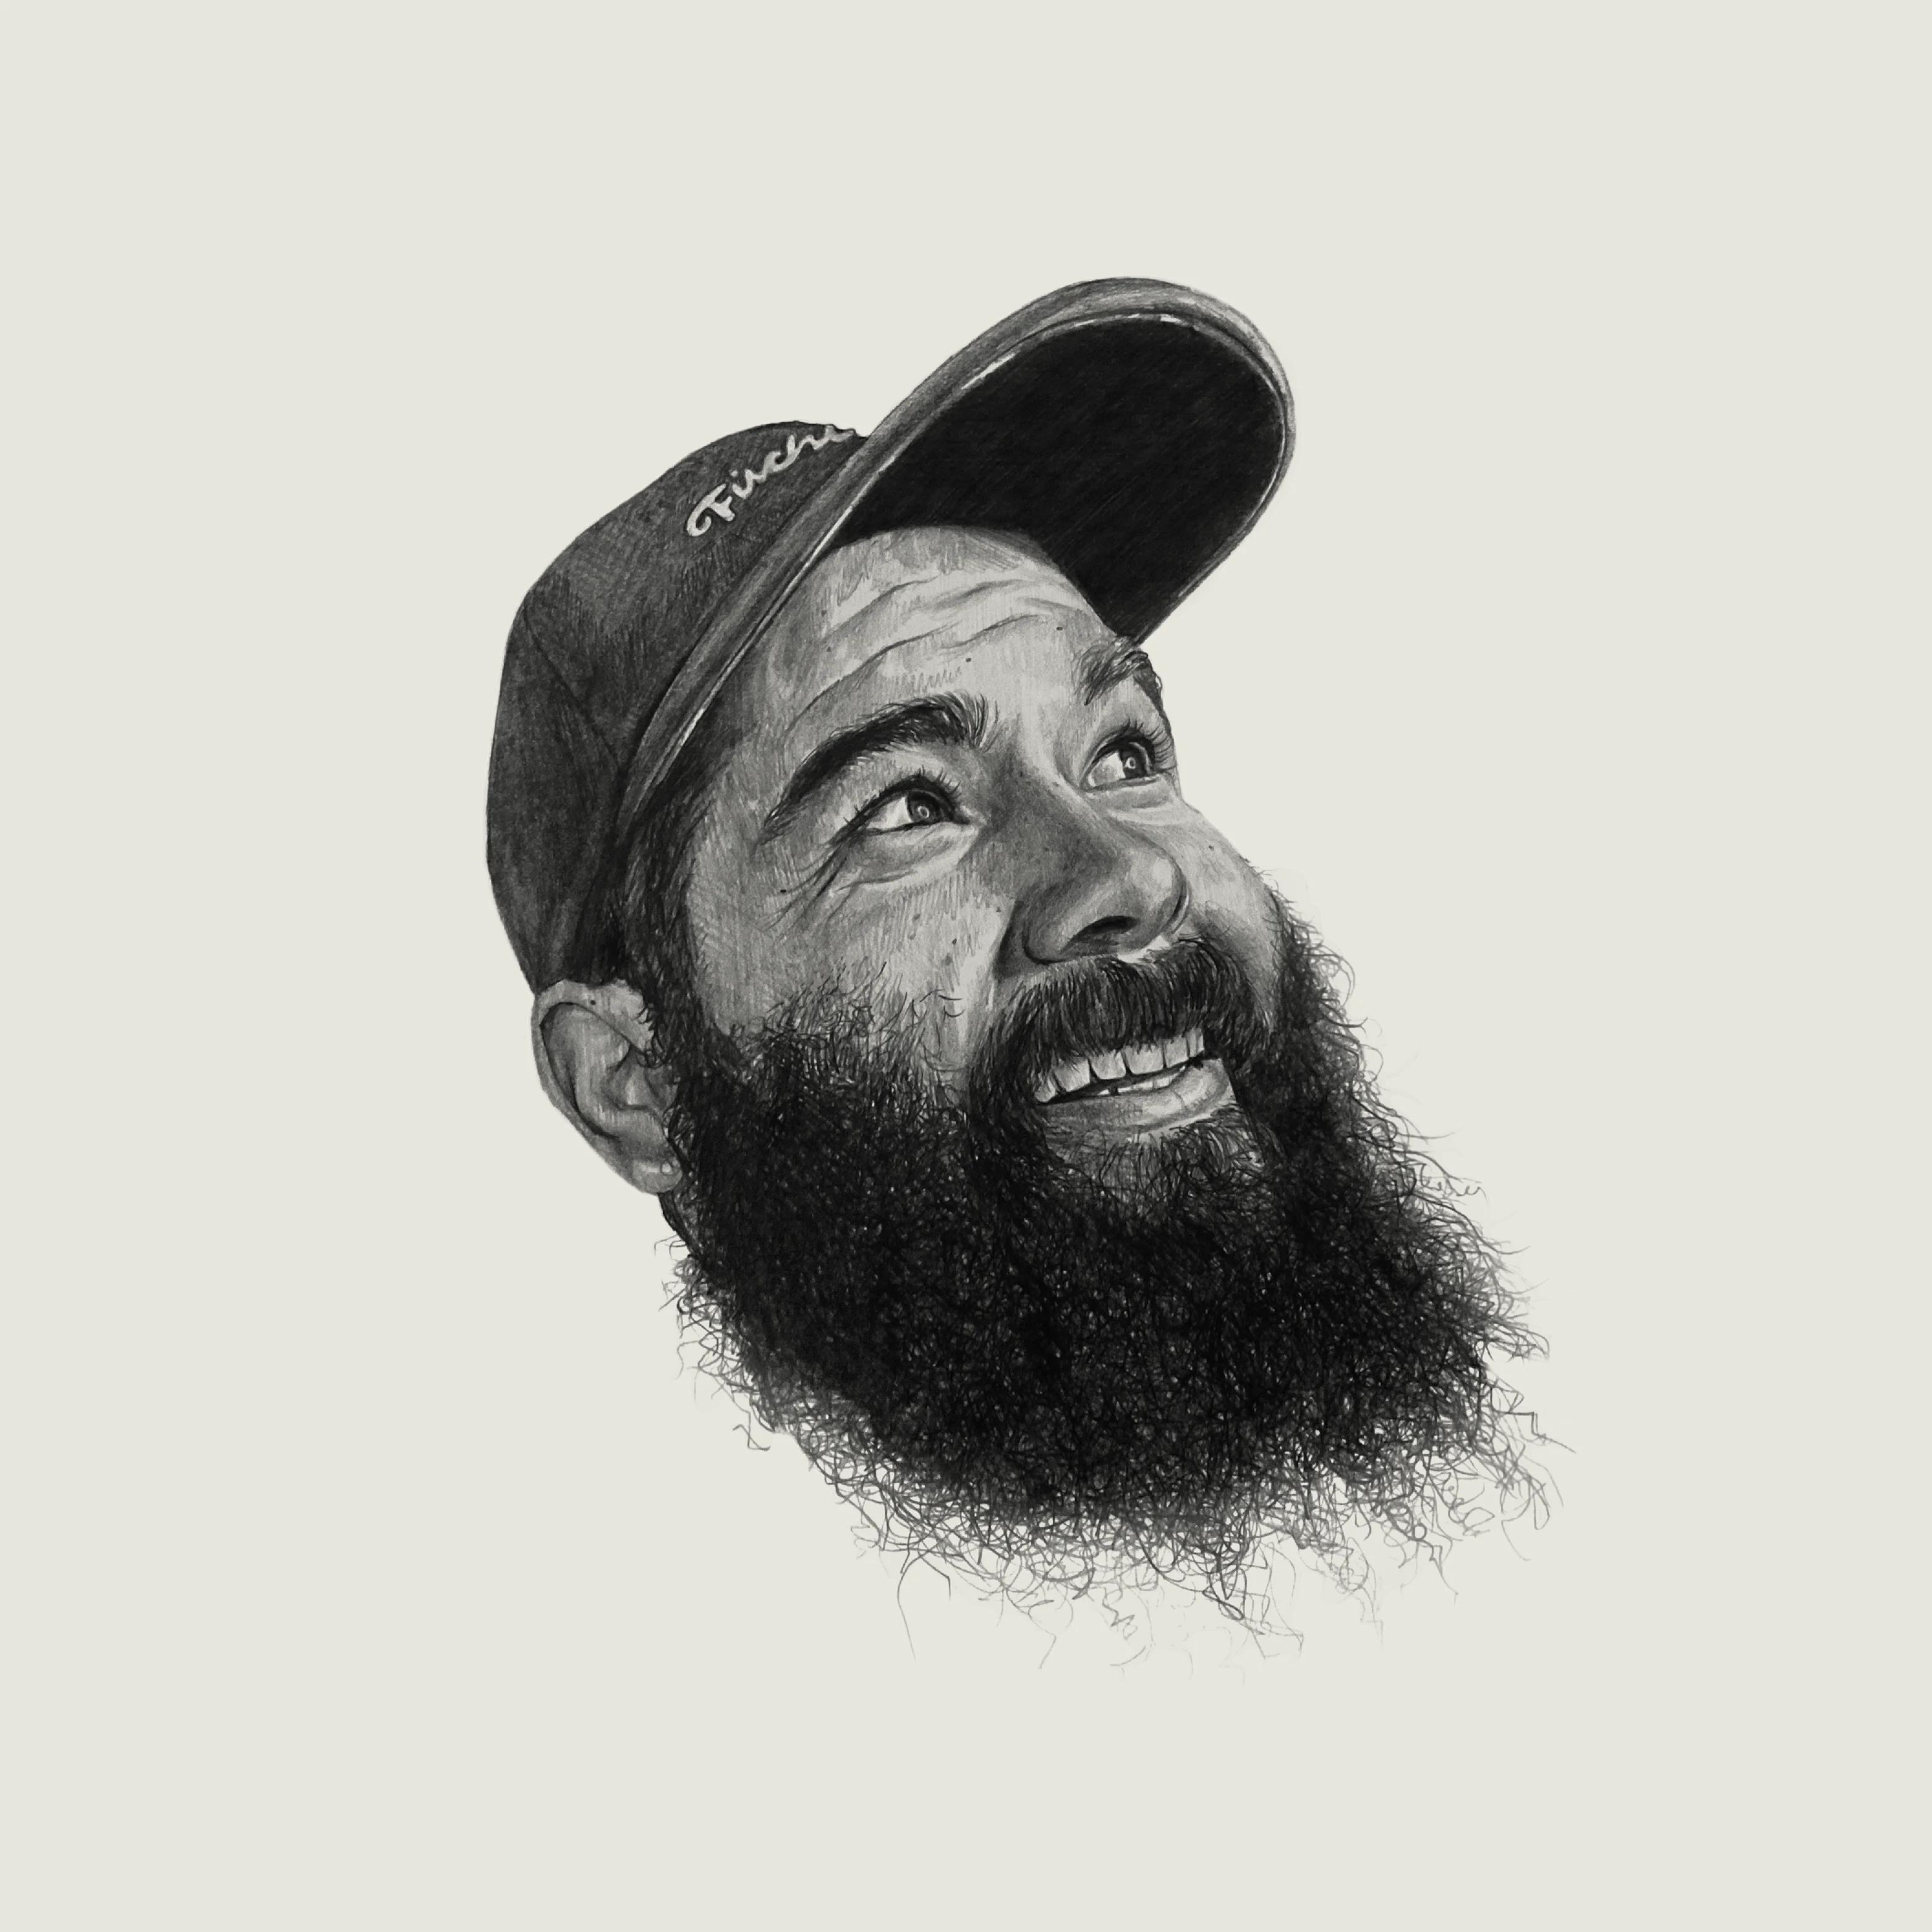 Black and white sketched portrait of smiling Ruben wearing a baseball cap. Ruben has a beard and his eyes are looking up